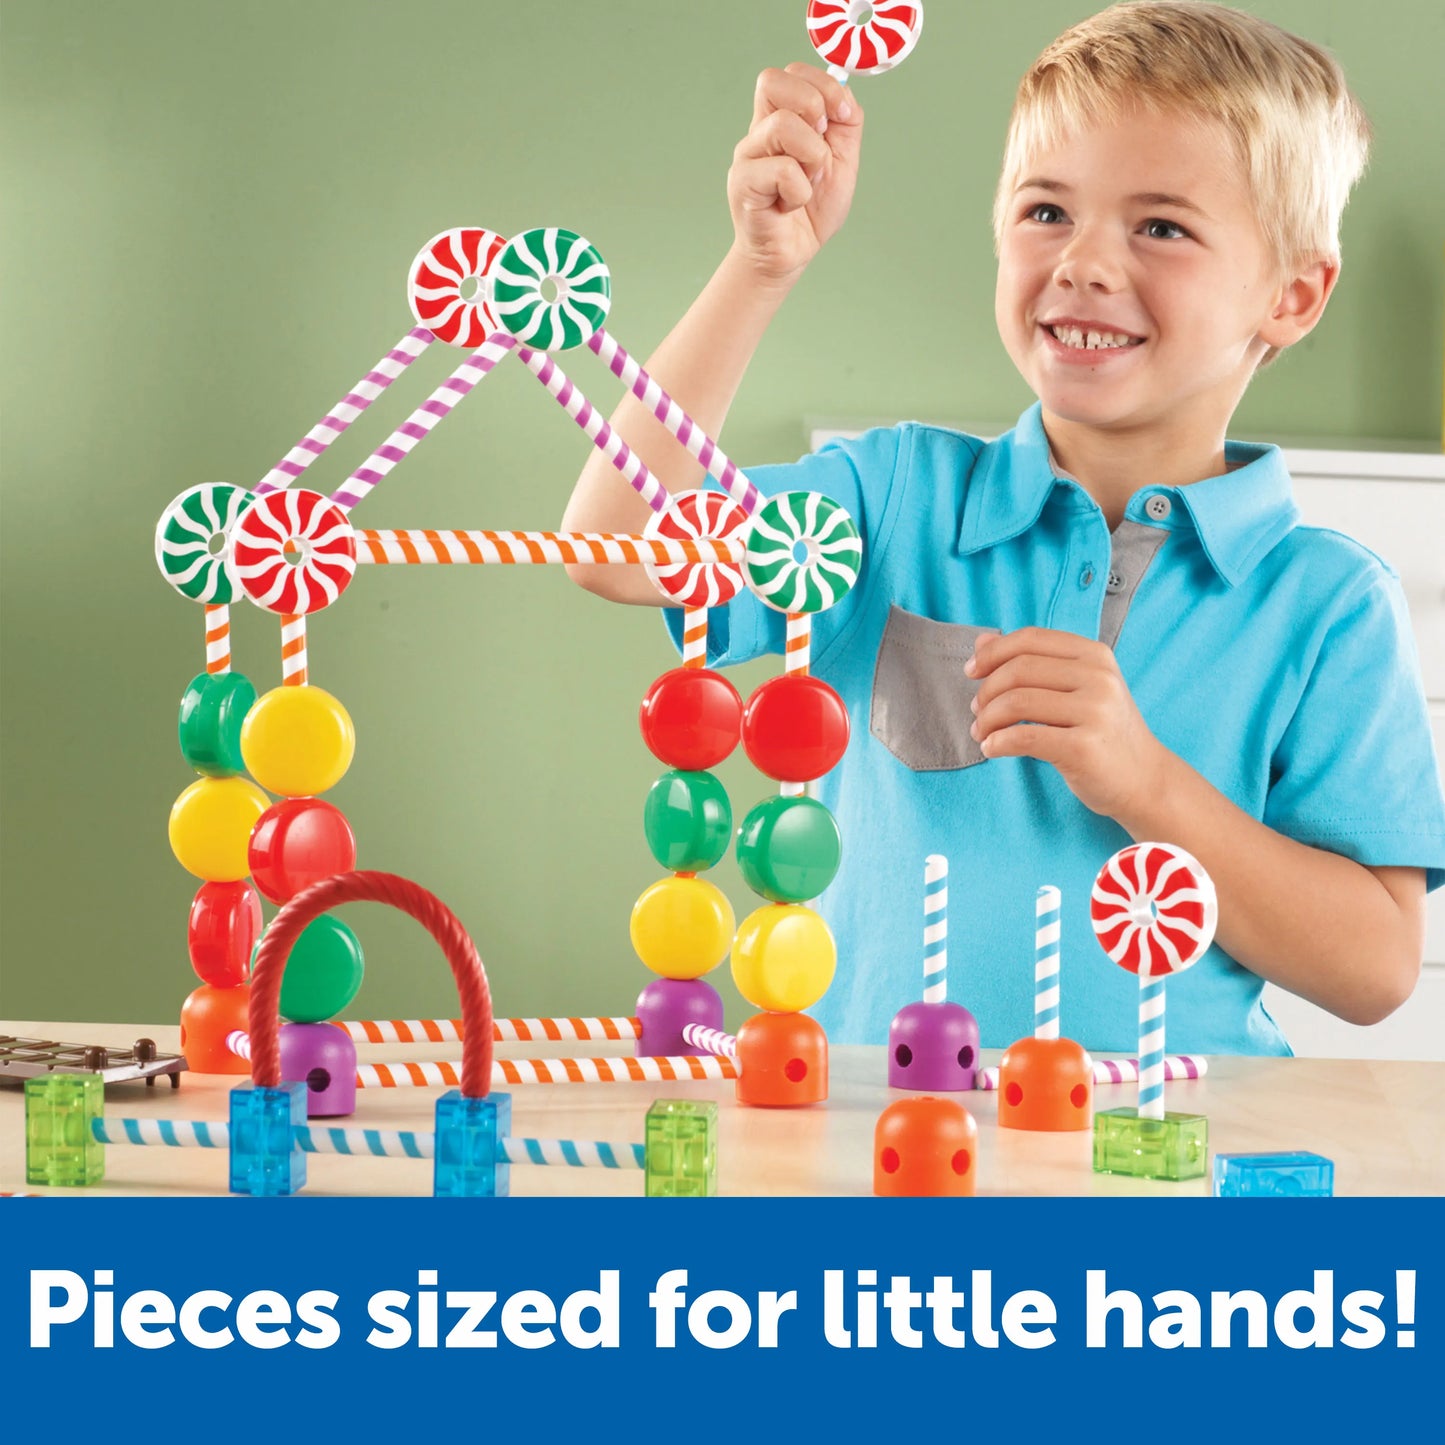 Learning Resources Candy Contruction Building Set